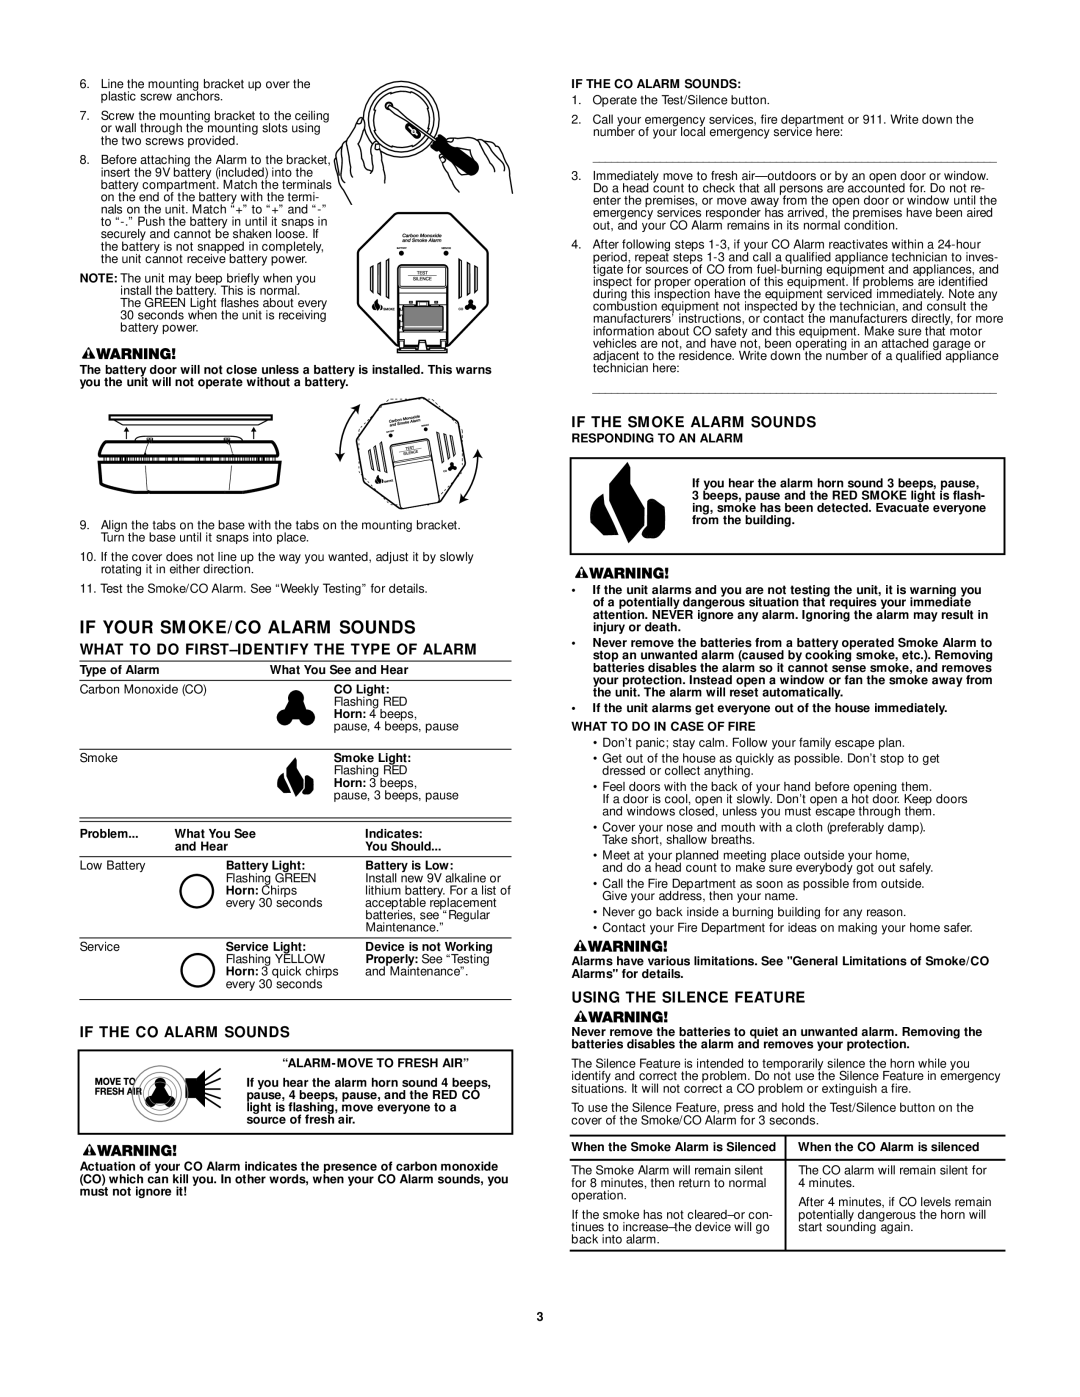 First Alert Carbon Monoxide Alarm user manual If Your Smoke/Co Alarm Sounds, What To Do First-Identifythe Type Of Alarm 